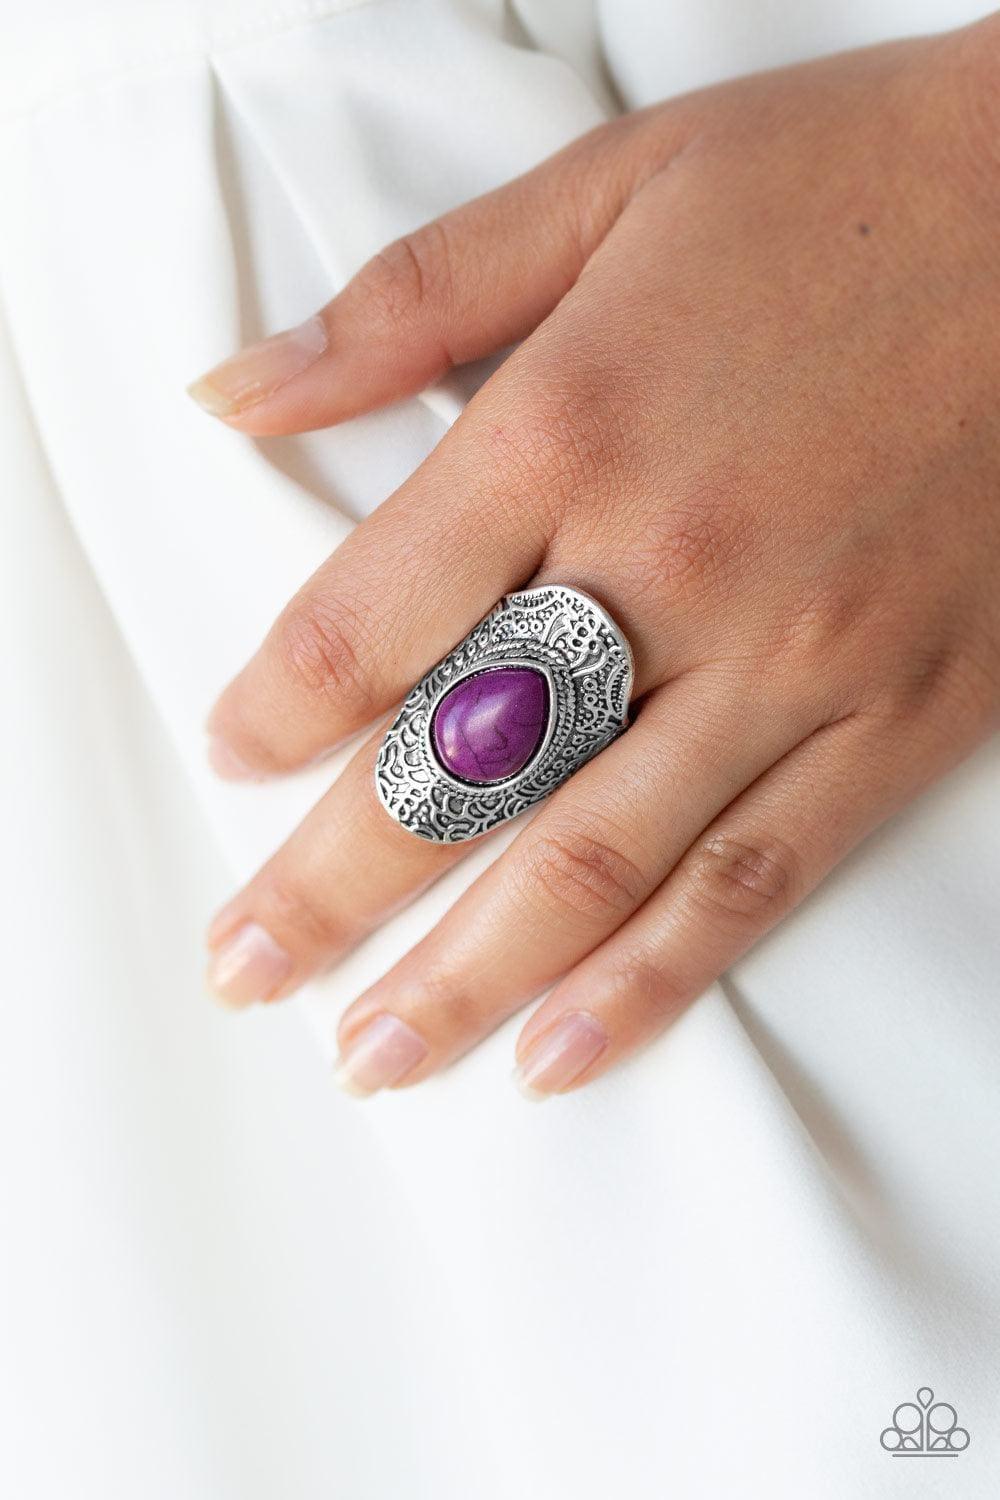 Paparazzi Accessories - Southern Sage - Purple Paparazzi Ring - Bling by JessieK